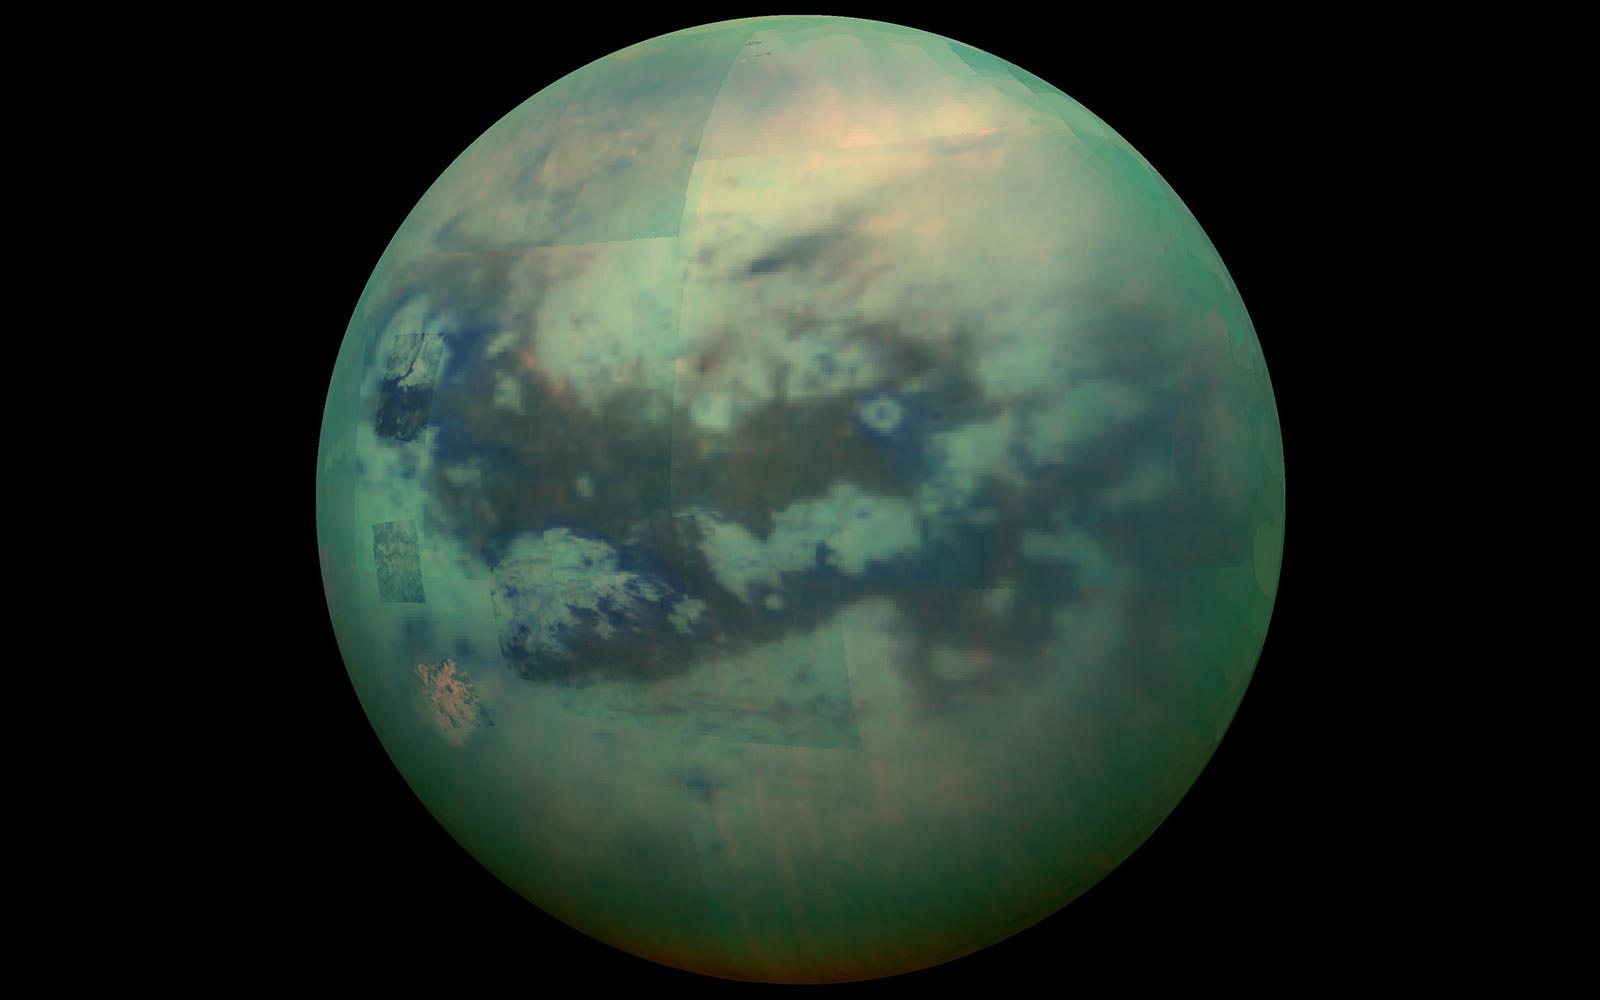 File: A composite image shows an infrared view of Saturn’s moon Titan from Nasa’s Cassini spacecraft